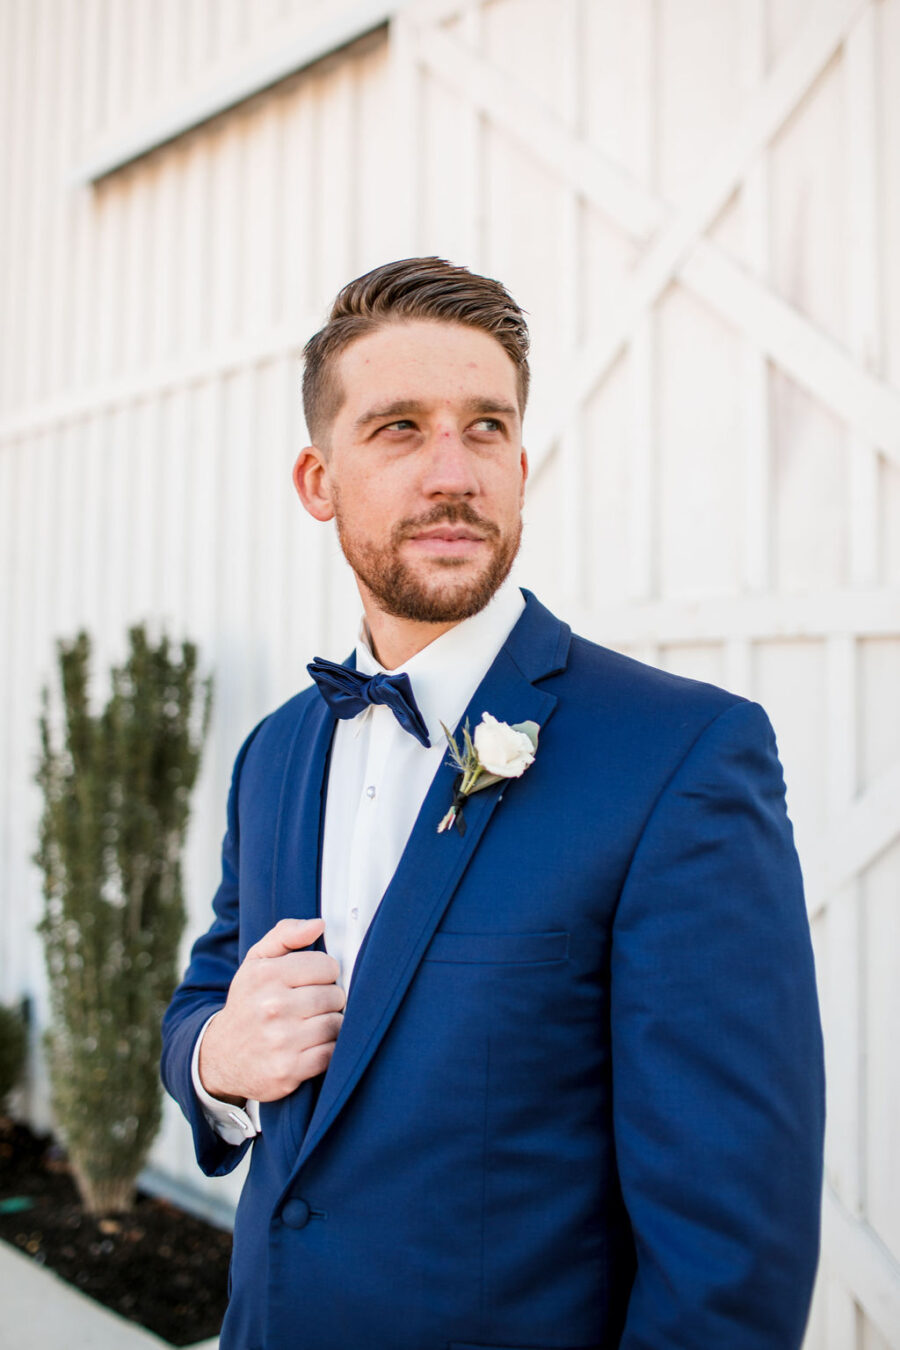 Grooms portrait: Intimate Barn Wedding from John Myers Photography